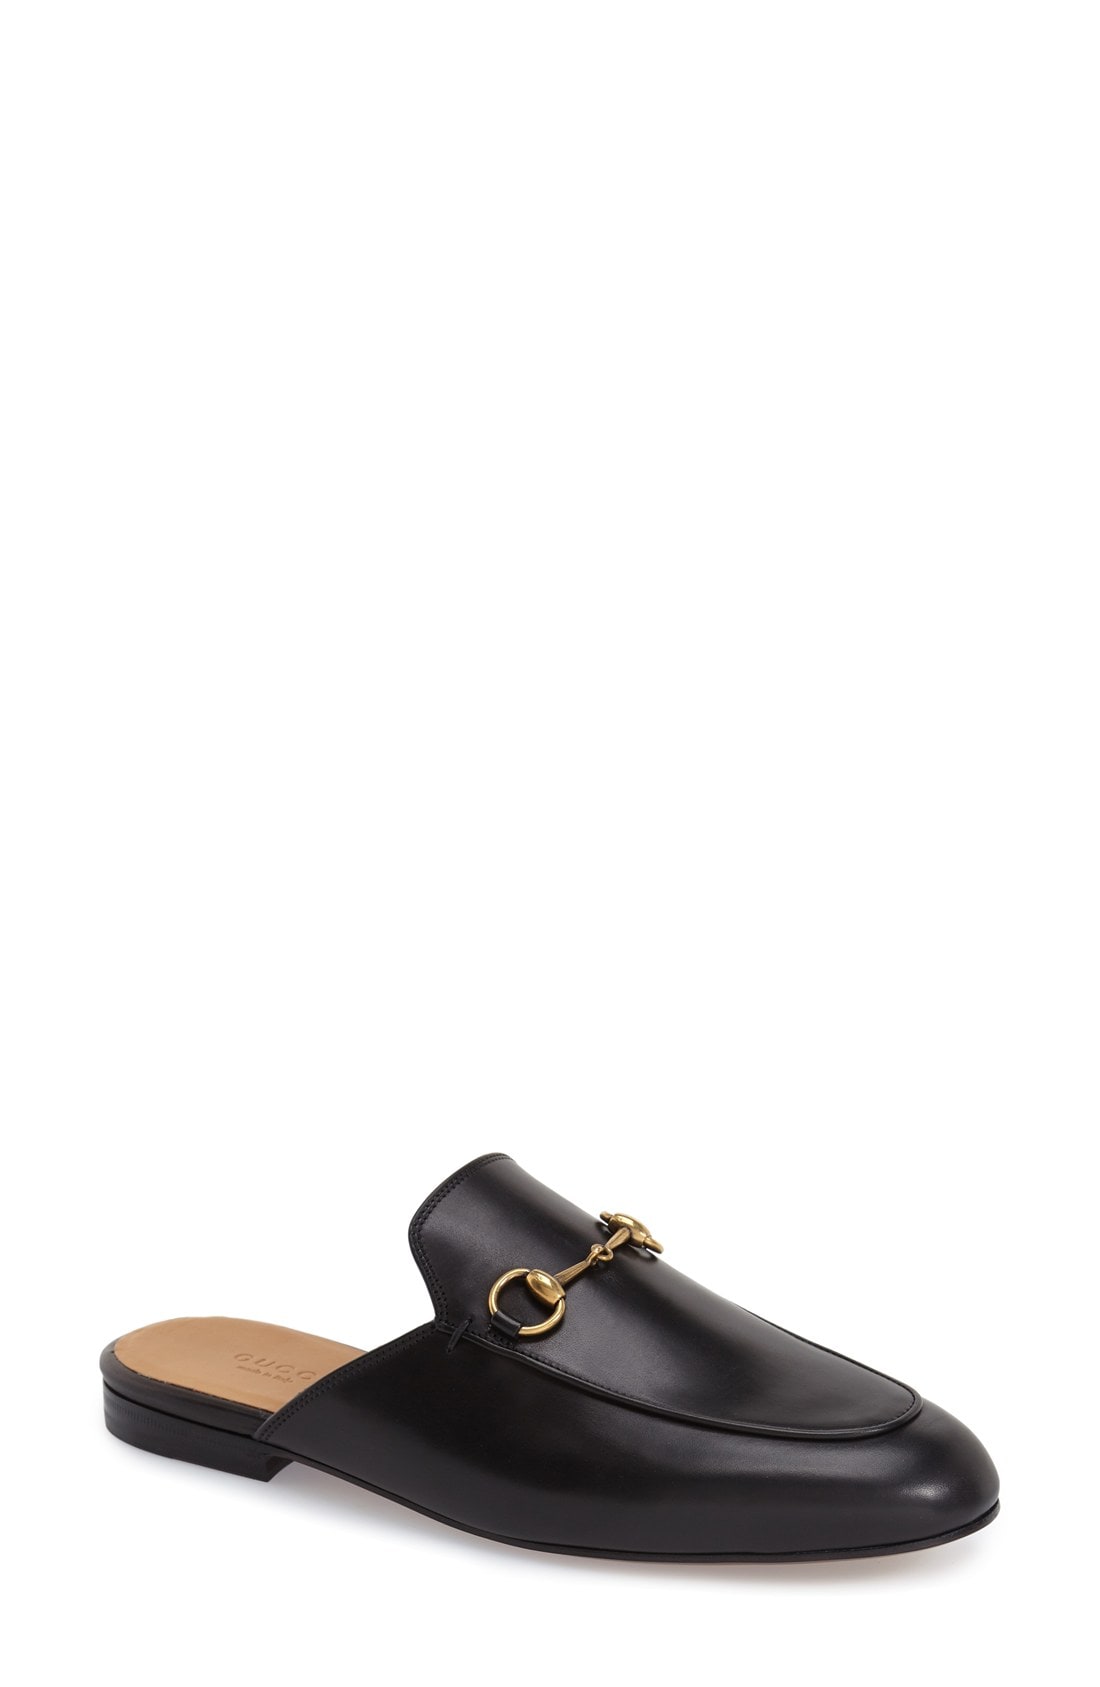 Gucci Princetown Loafer Mule (Women)